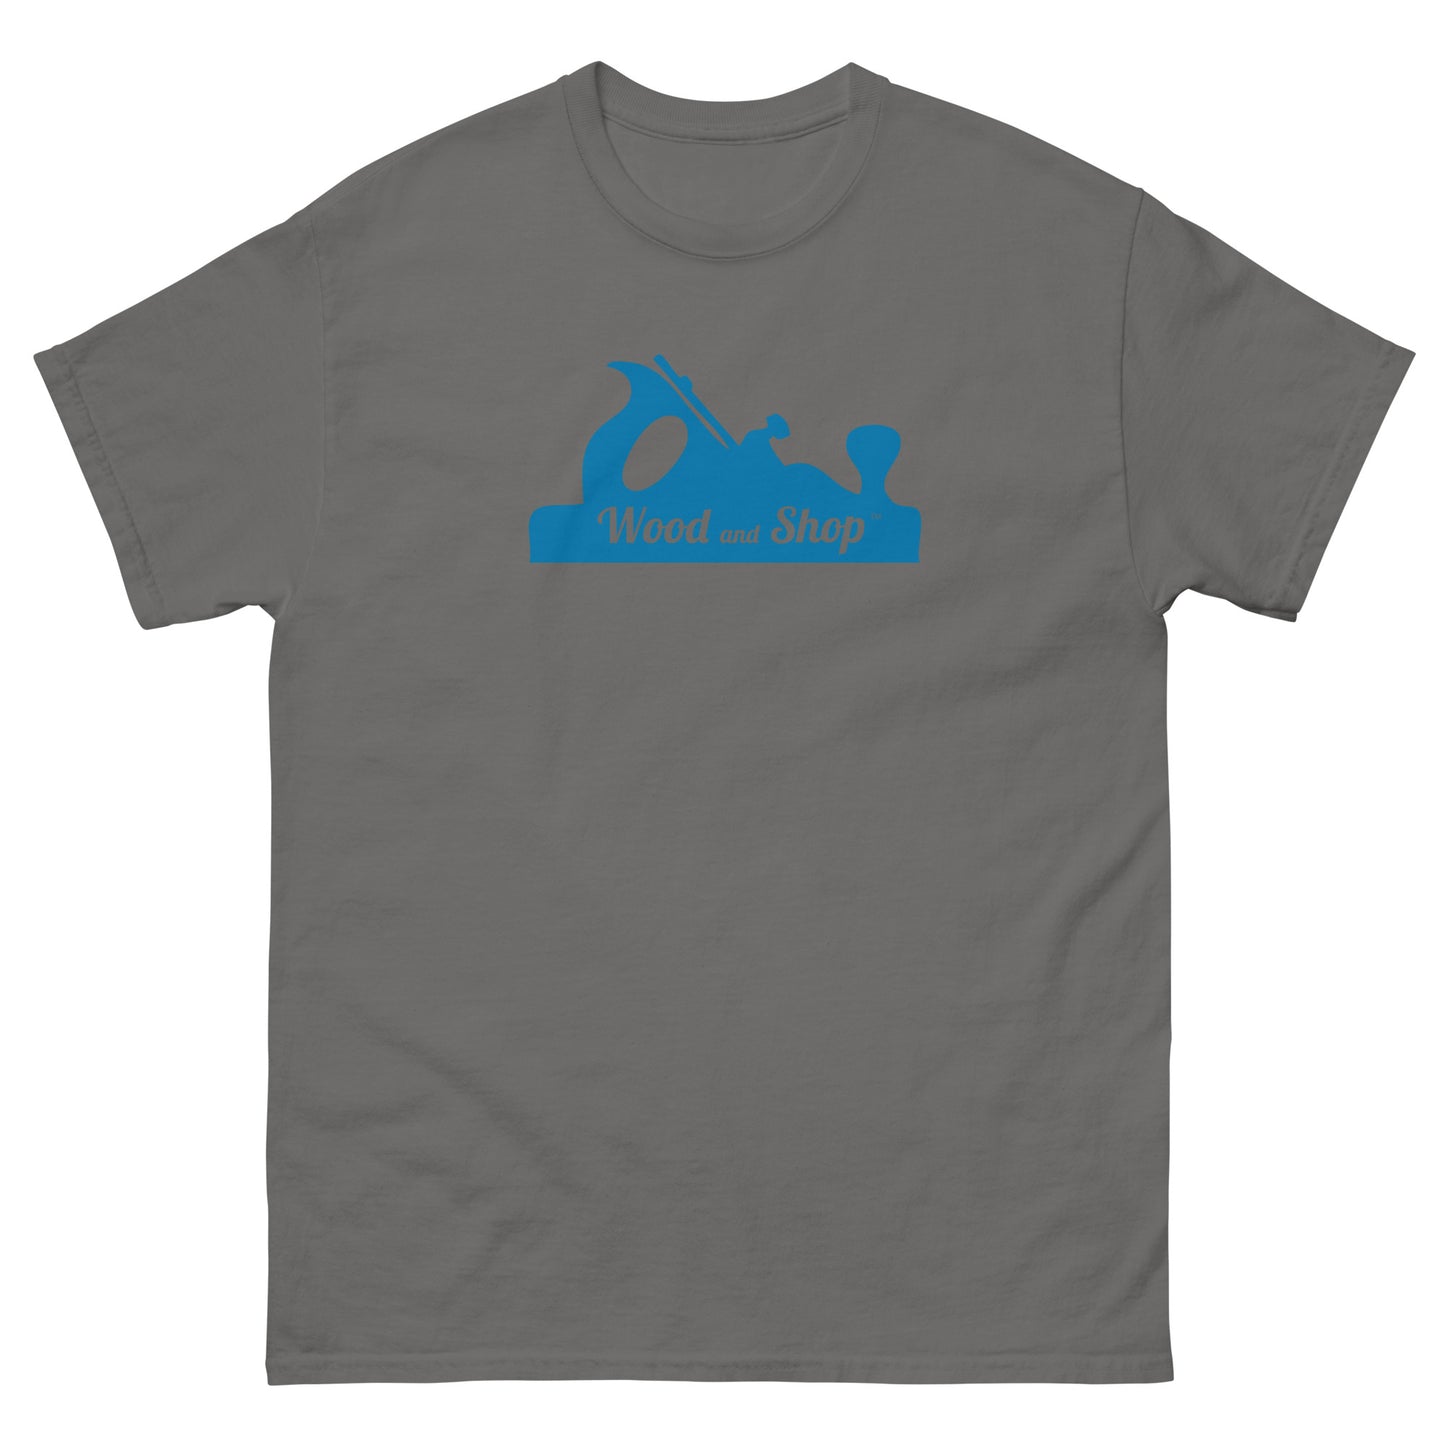 “Wood and Shop” Logo Woodworking Shirt (Multiple Colors)